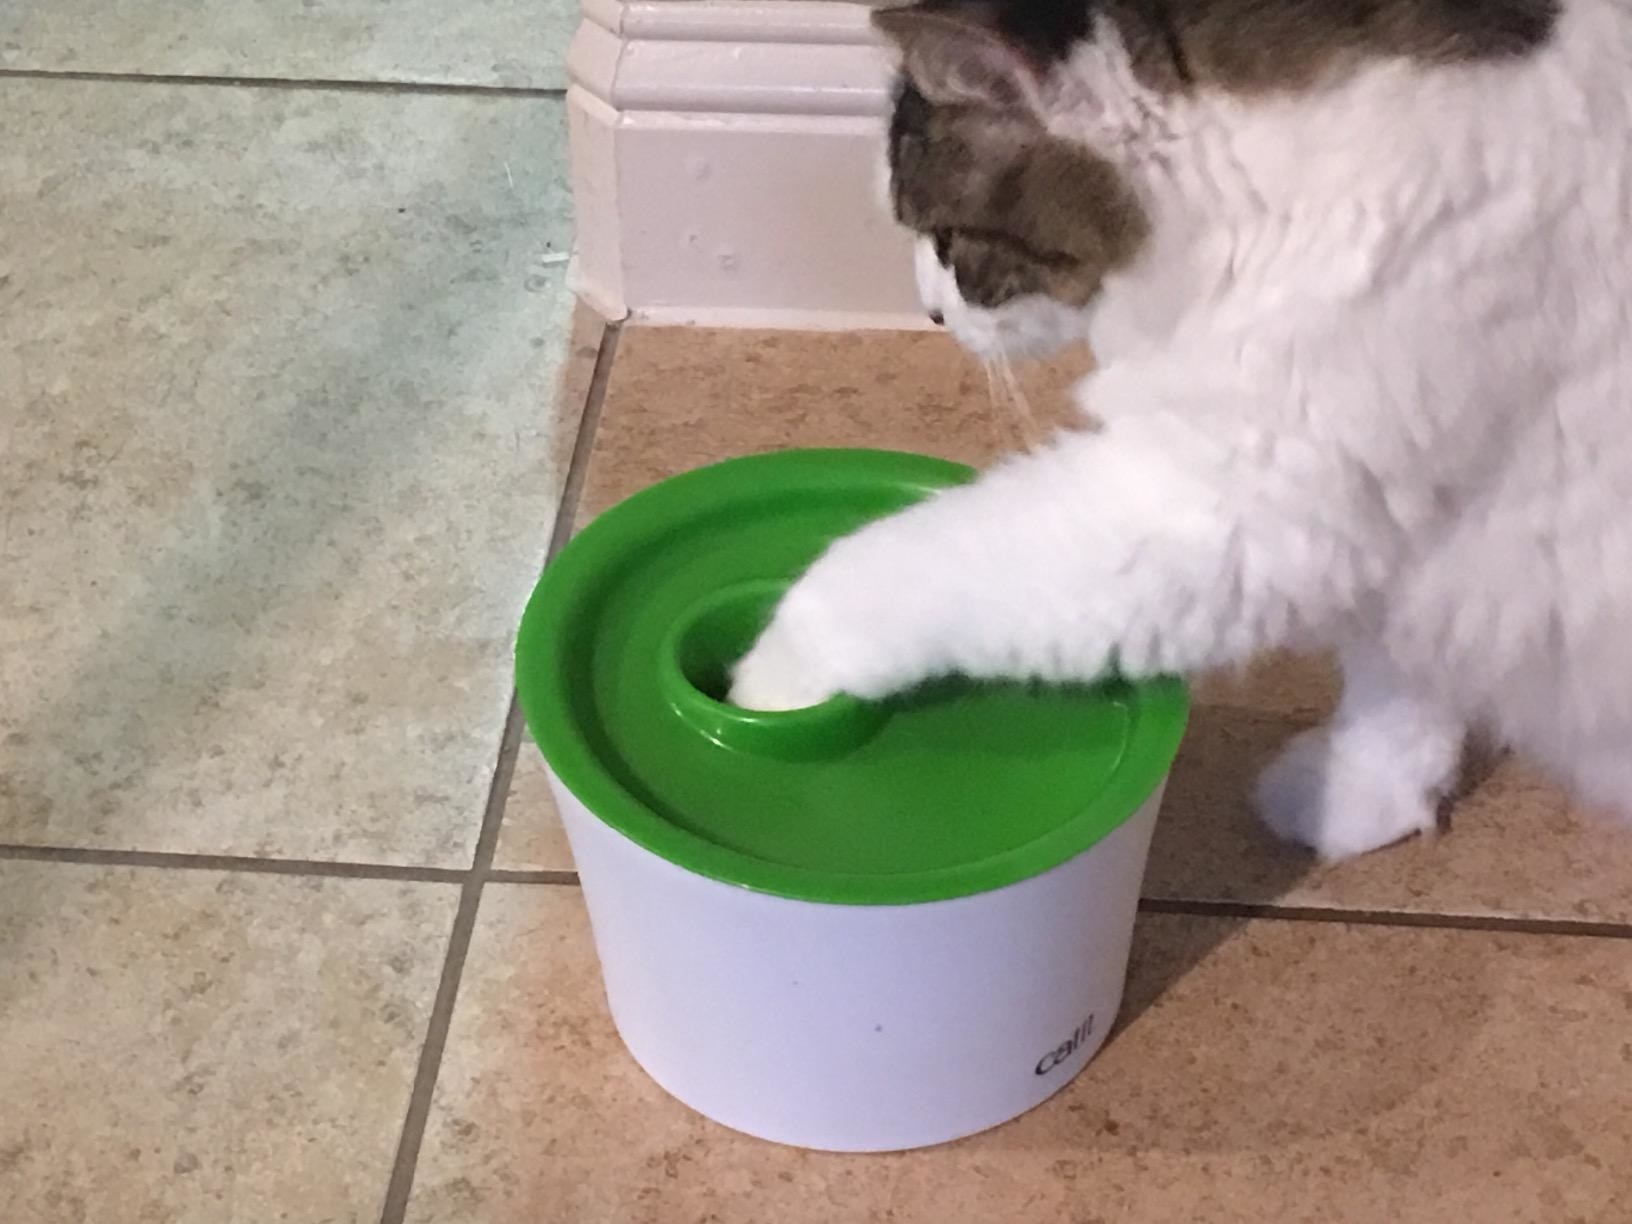 Reviewer photo of their cat dipping its paw into the center compartment to grab food